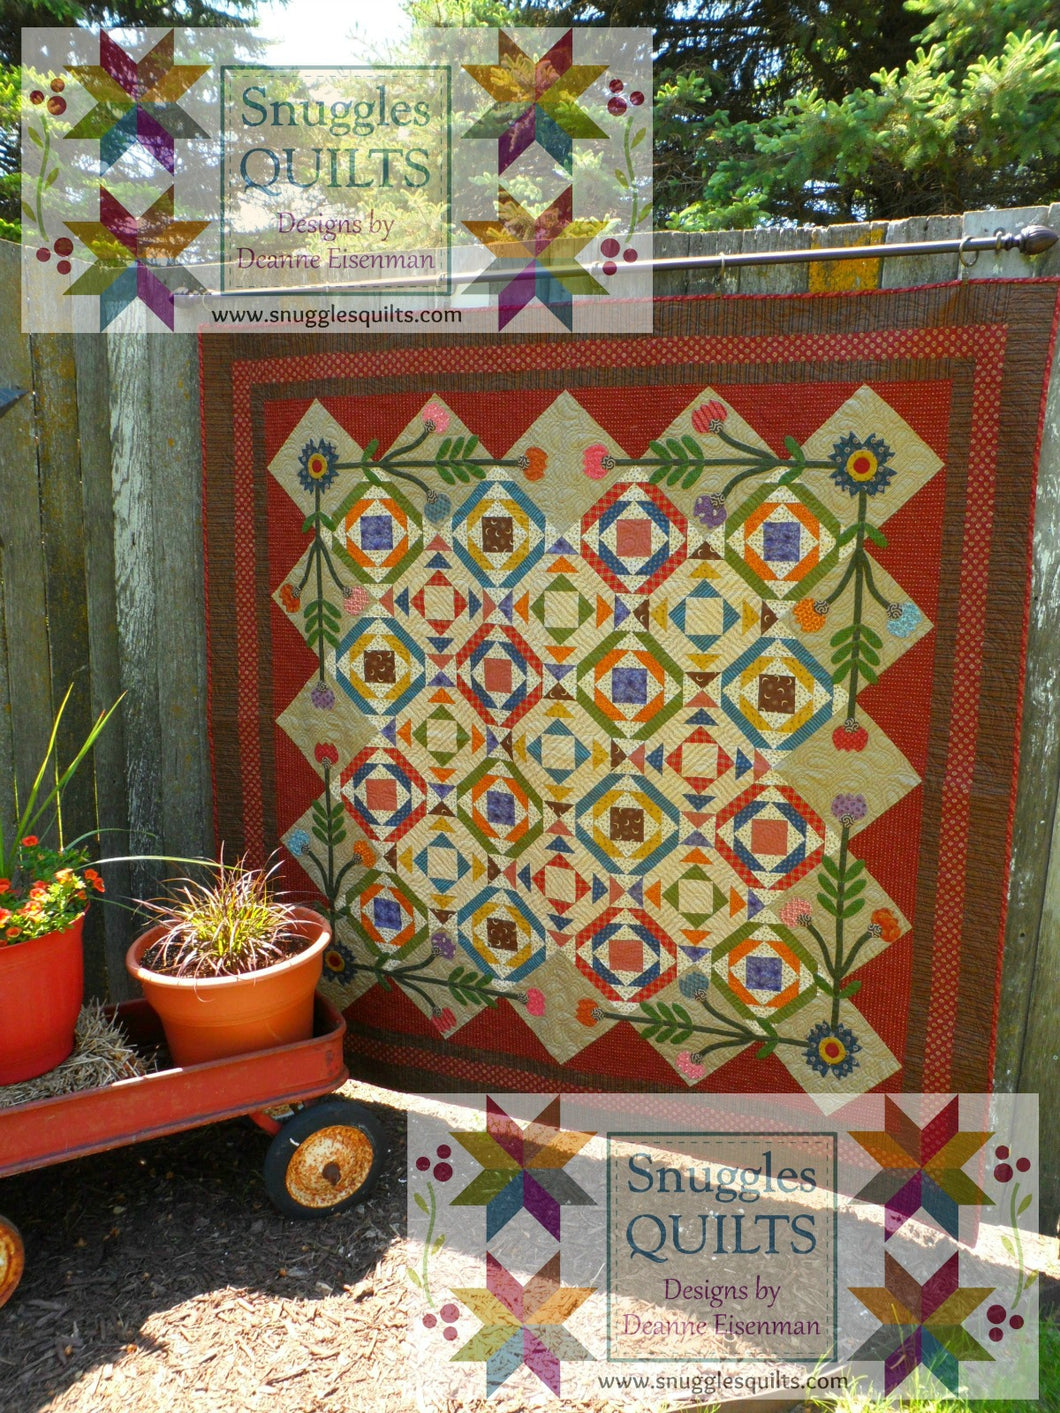 Scrappy lap quilt pattern with applique designed by Deanne Eisenman for Snuggles Quilts